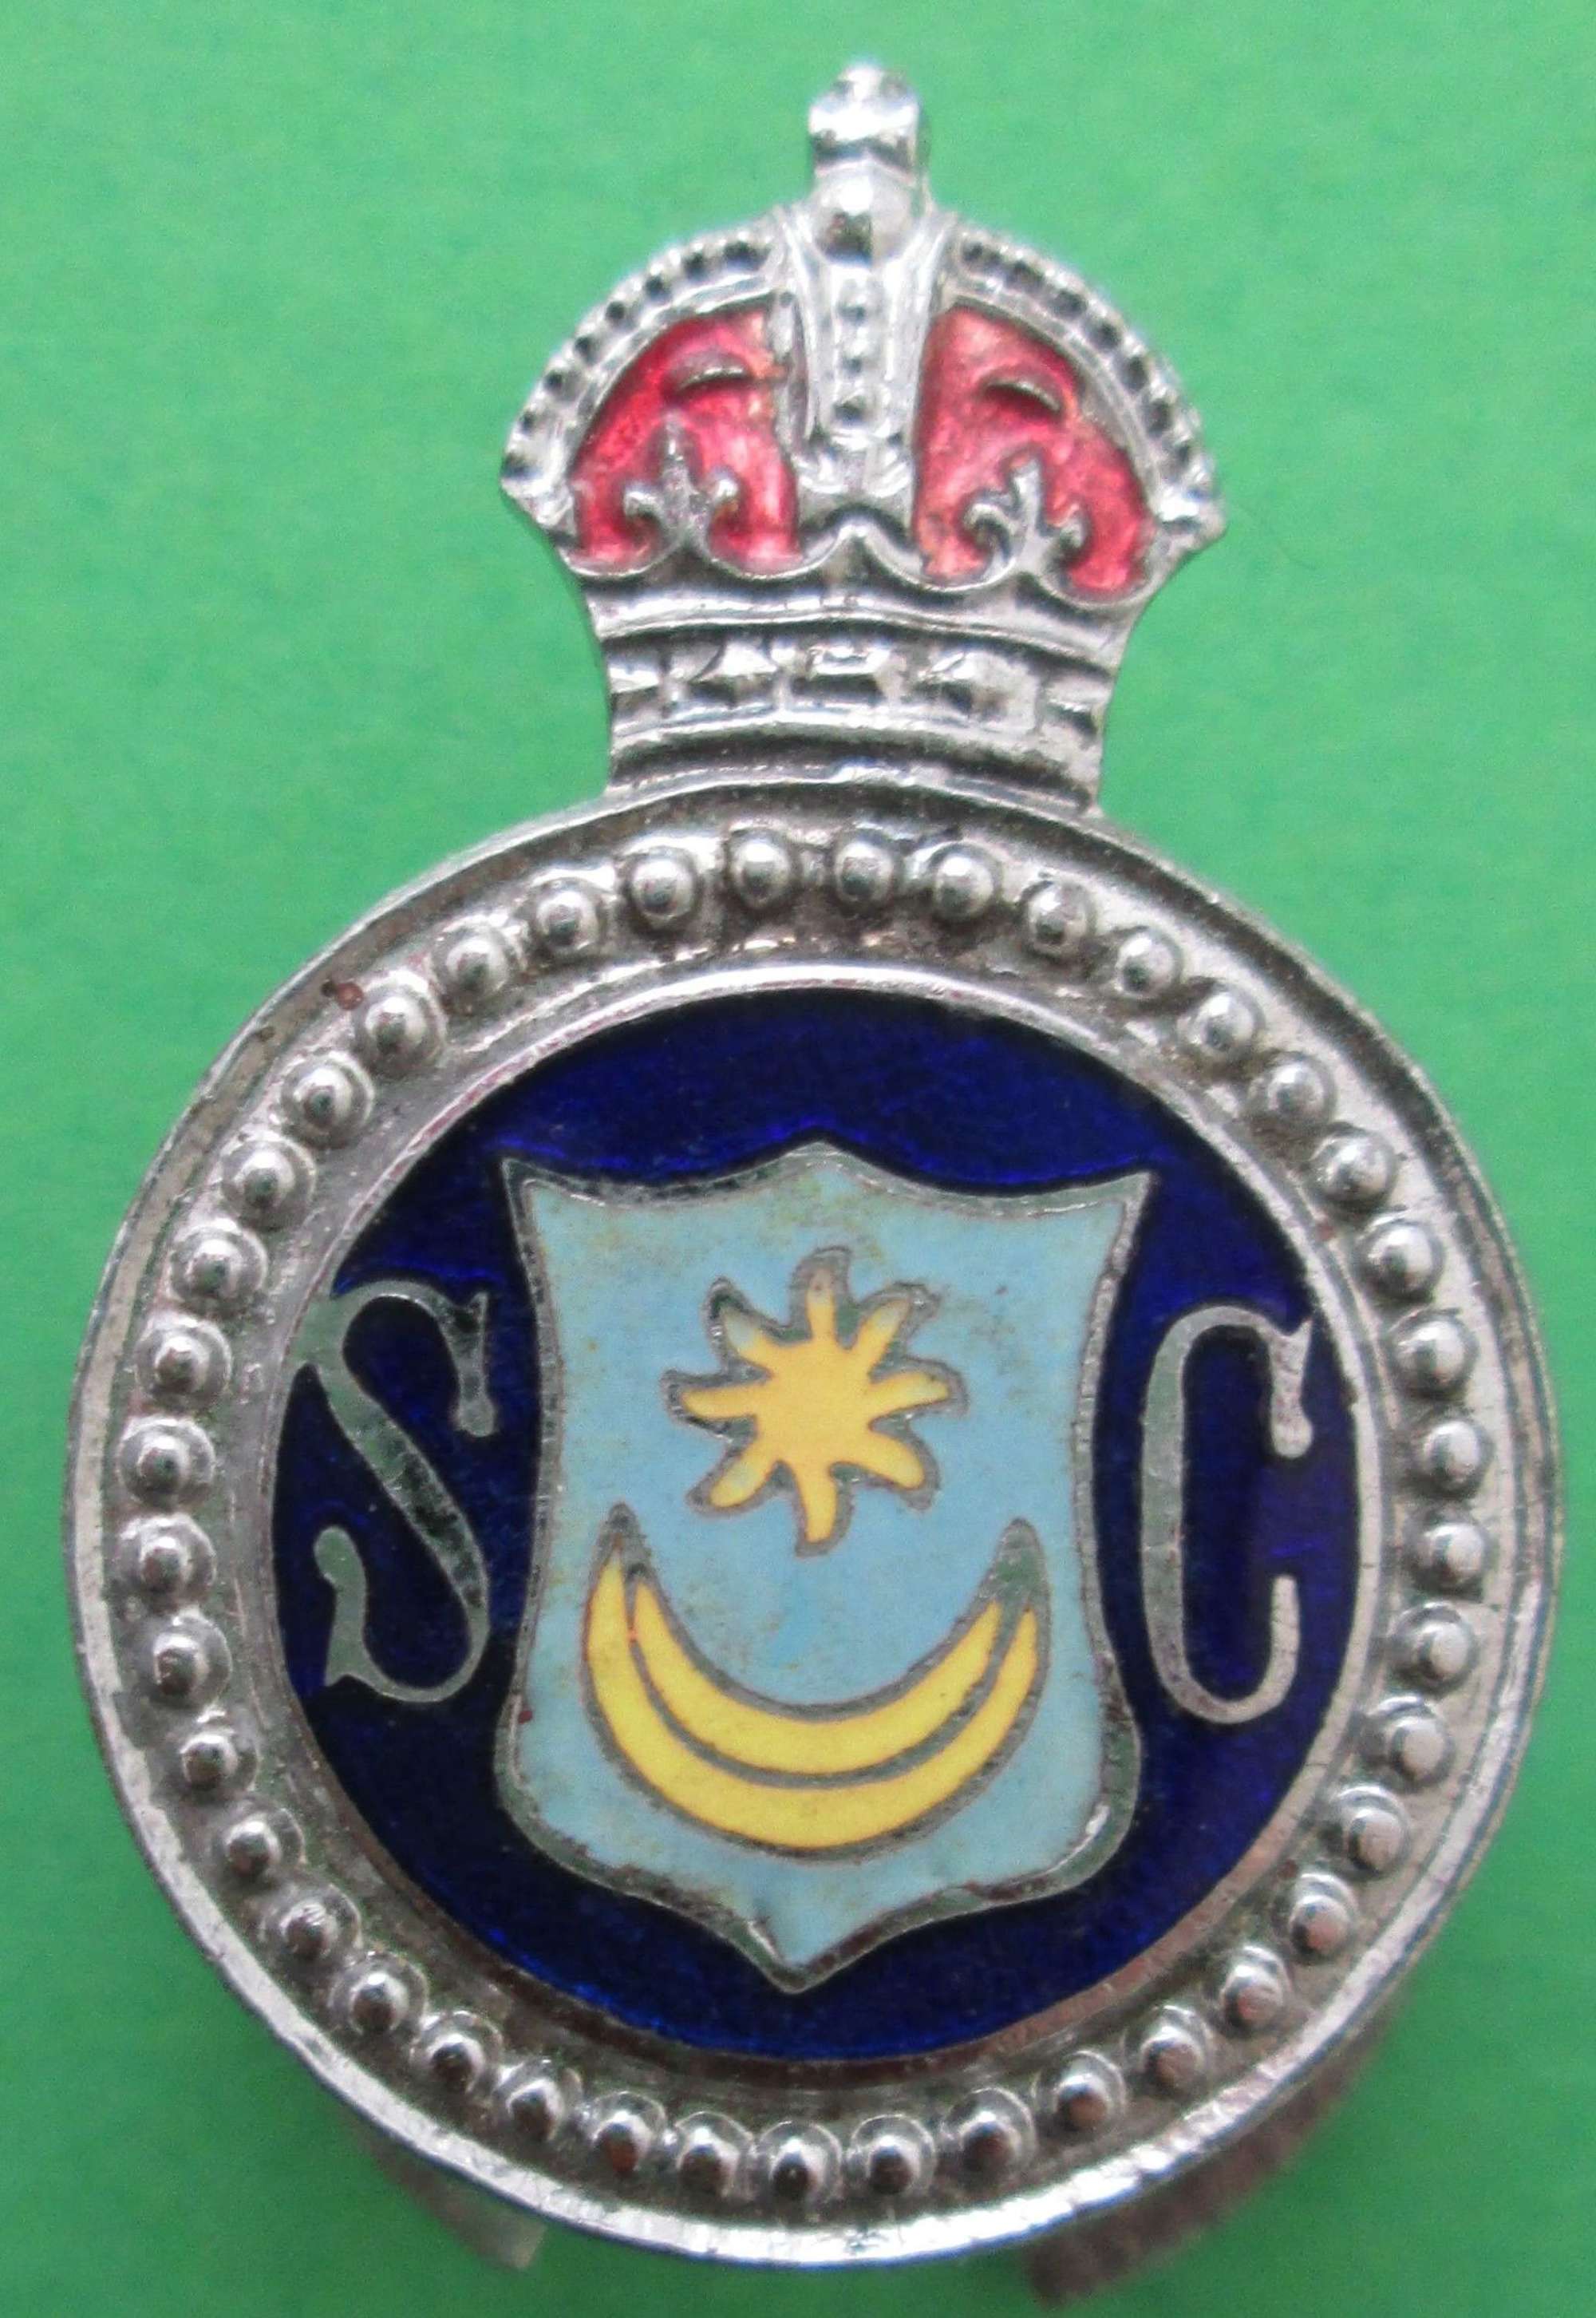 A PRE 1952 KINGS CROWN POSRTSMOUTH SPECIAL CONSTABULARY LAPEL BADGE